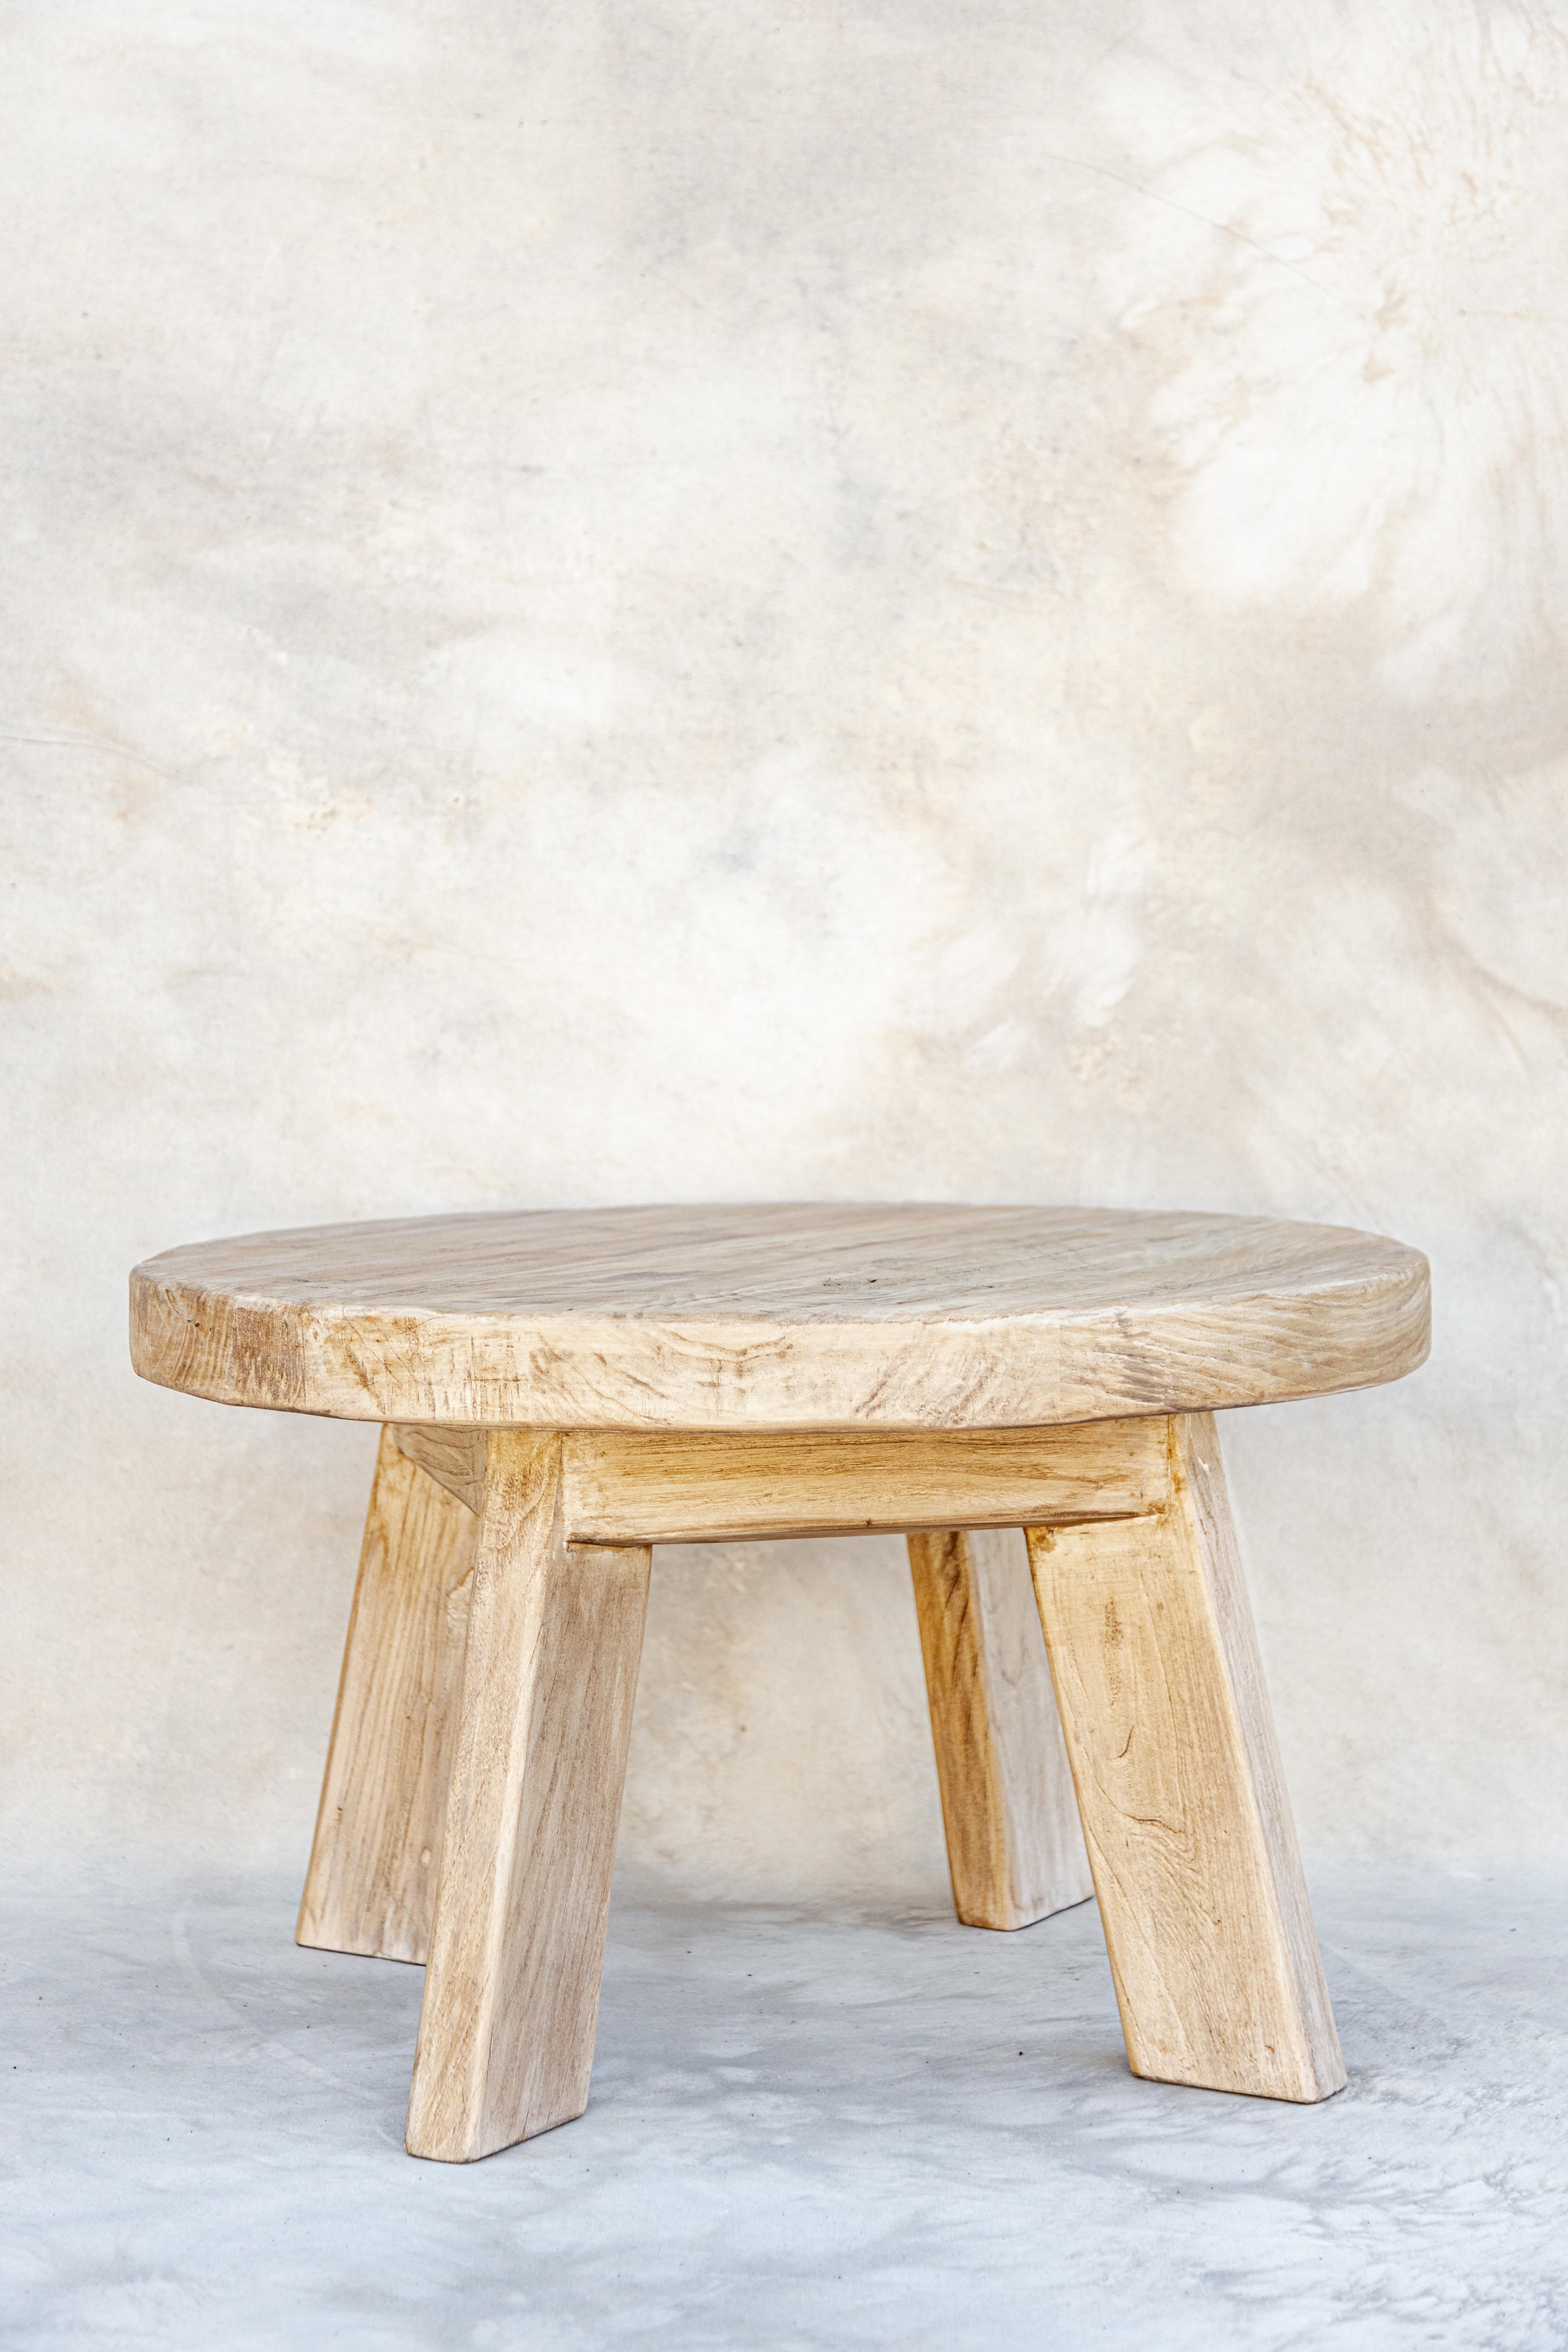 Introducing our Georgia coffee table. Crafted from vintage elm wood sourced all over Europe and Asia. One of a kind. No two are the same. We love her rustic texture and natural wood tones. Style her solo or with two side-by-side.